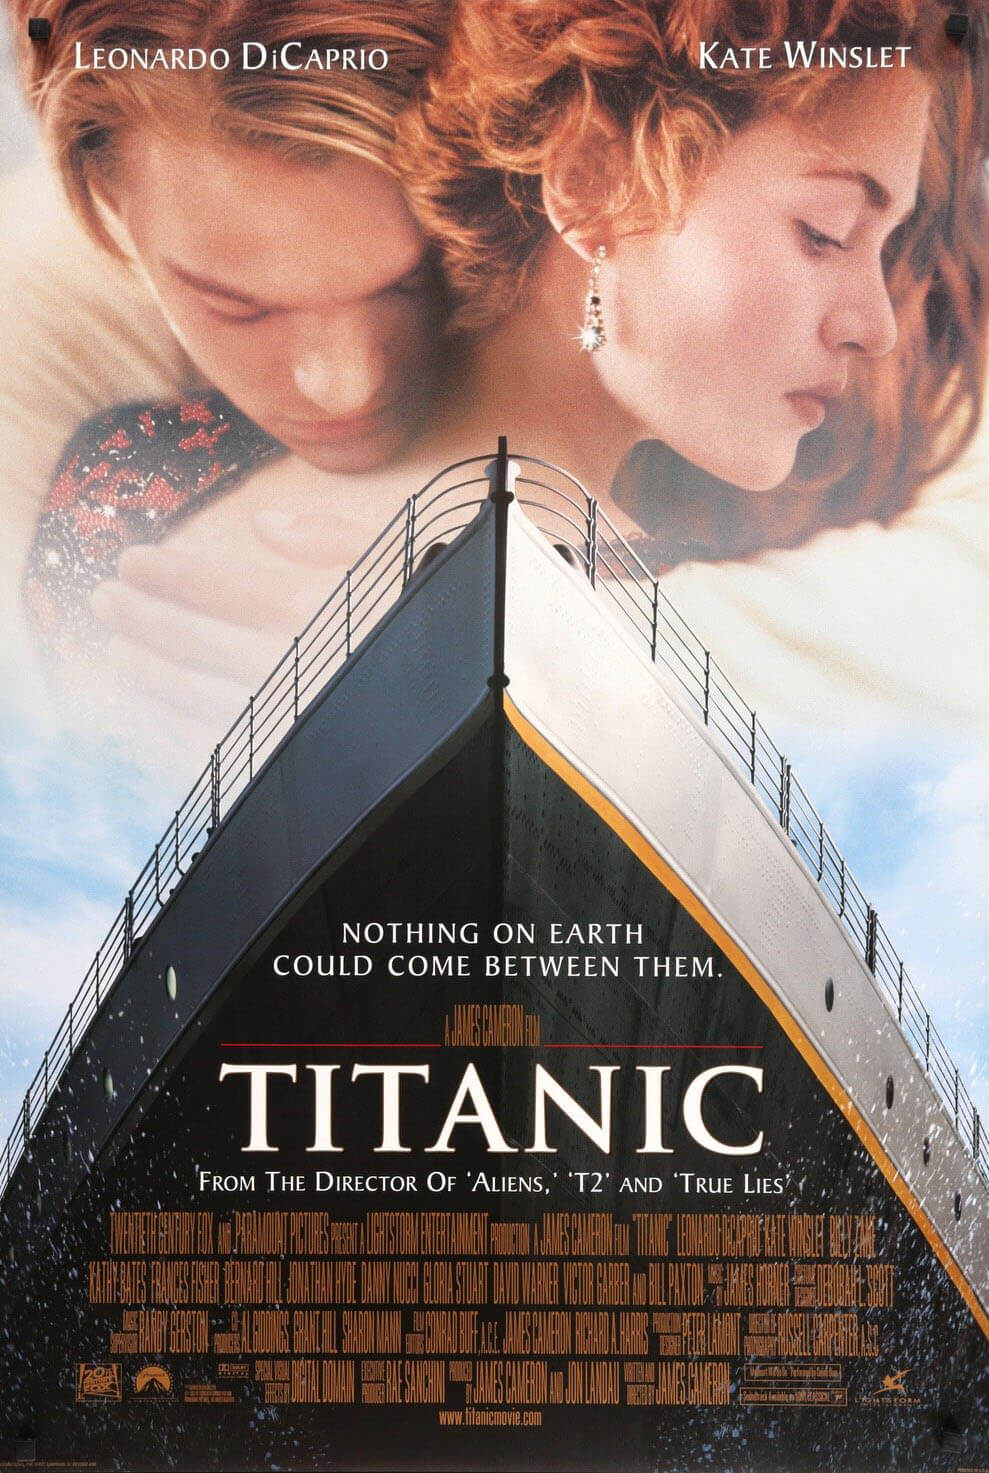 The poster for the film Titanic